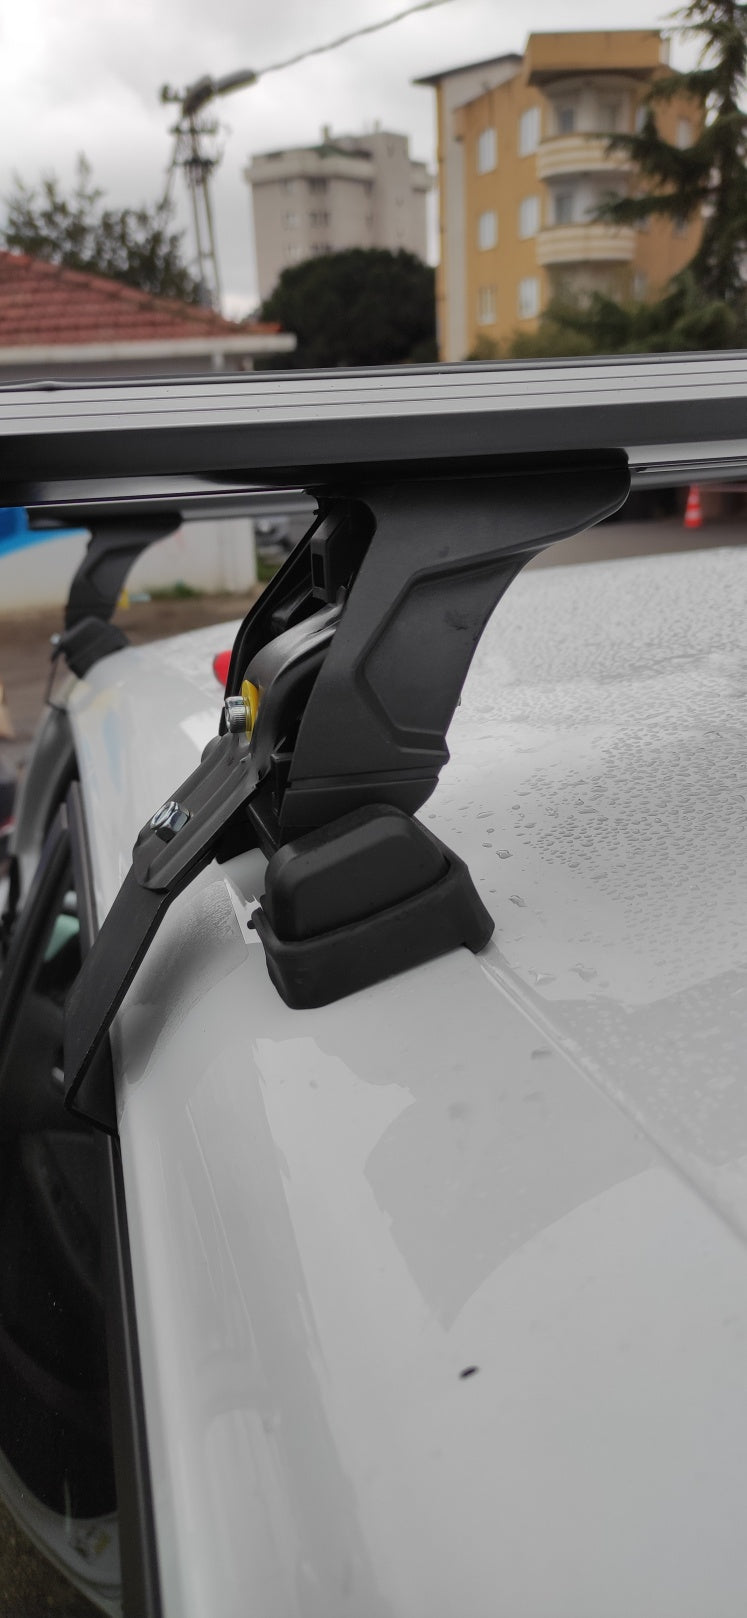 For Renault Clio 4 Hatcback  Roof Rack System Carrier Cross Bars Aluminum Lockable High Quality of Metal Bracket Silver